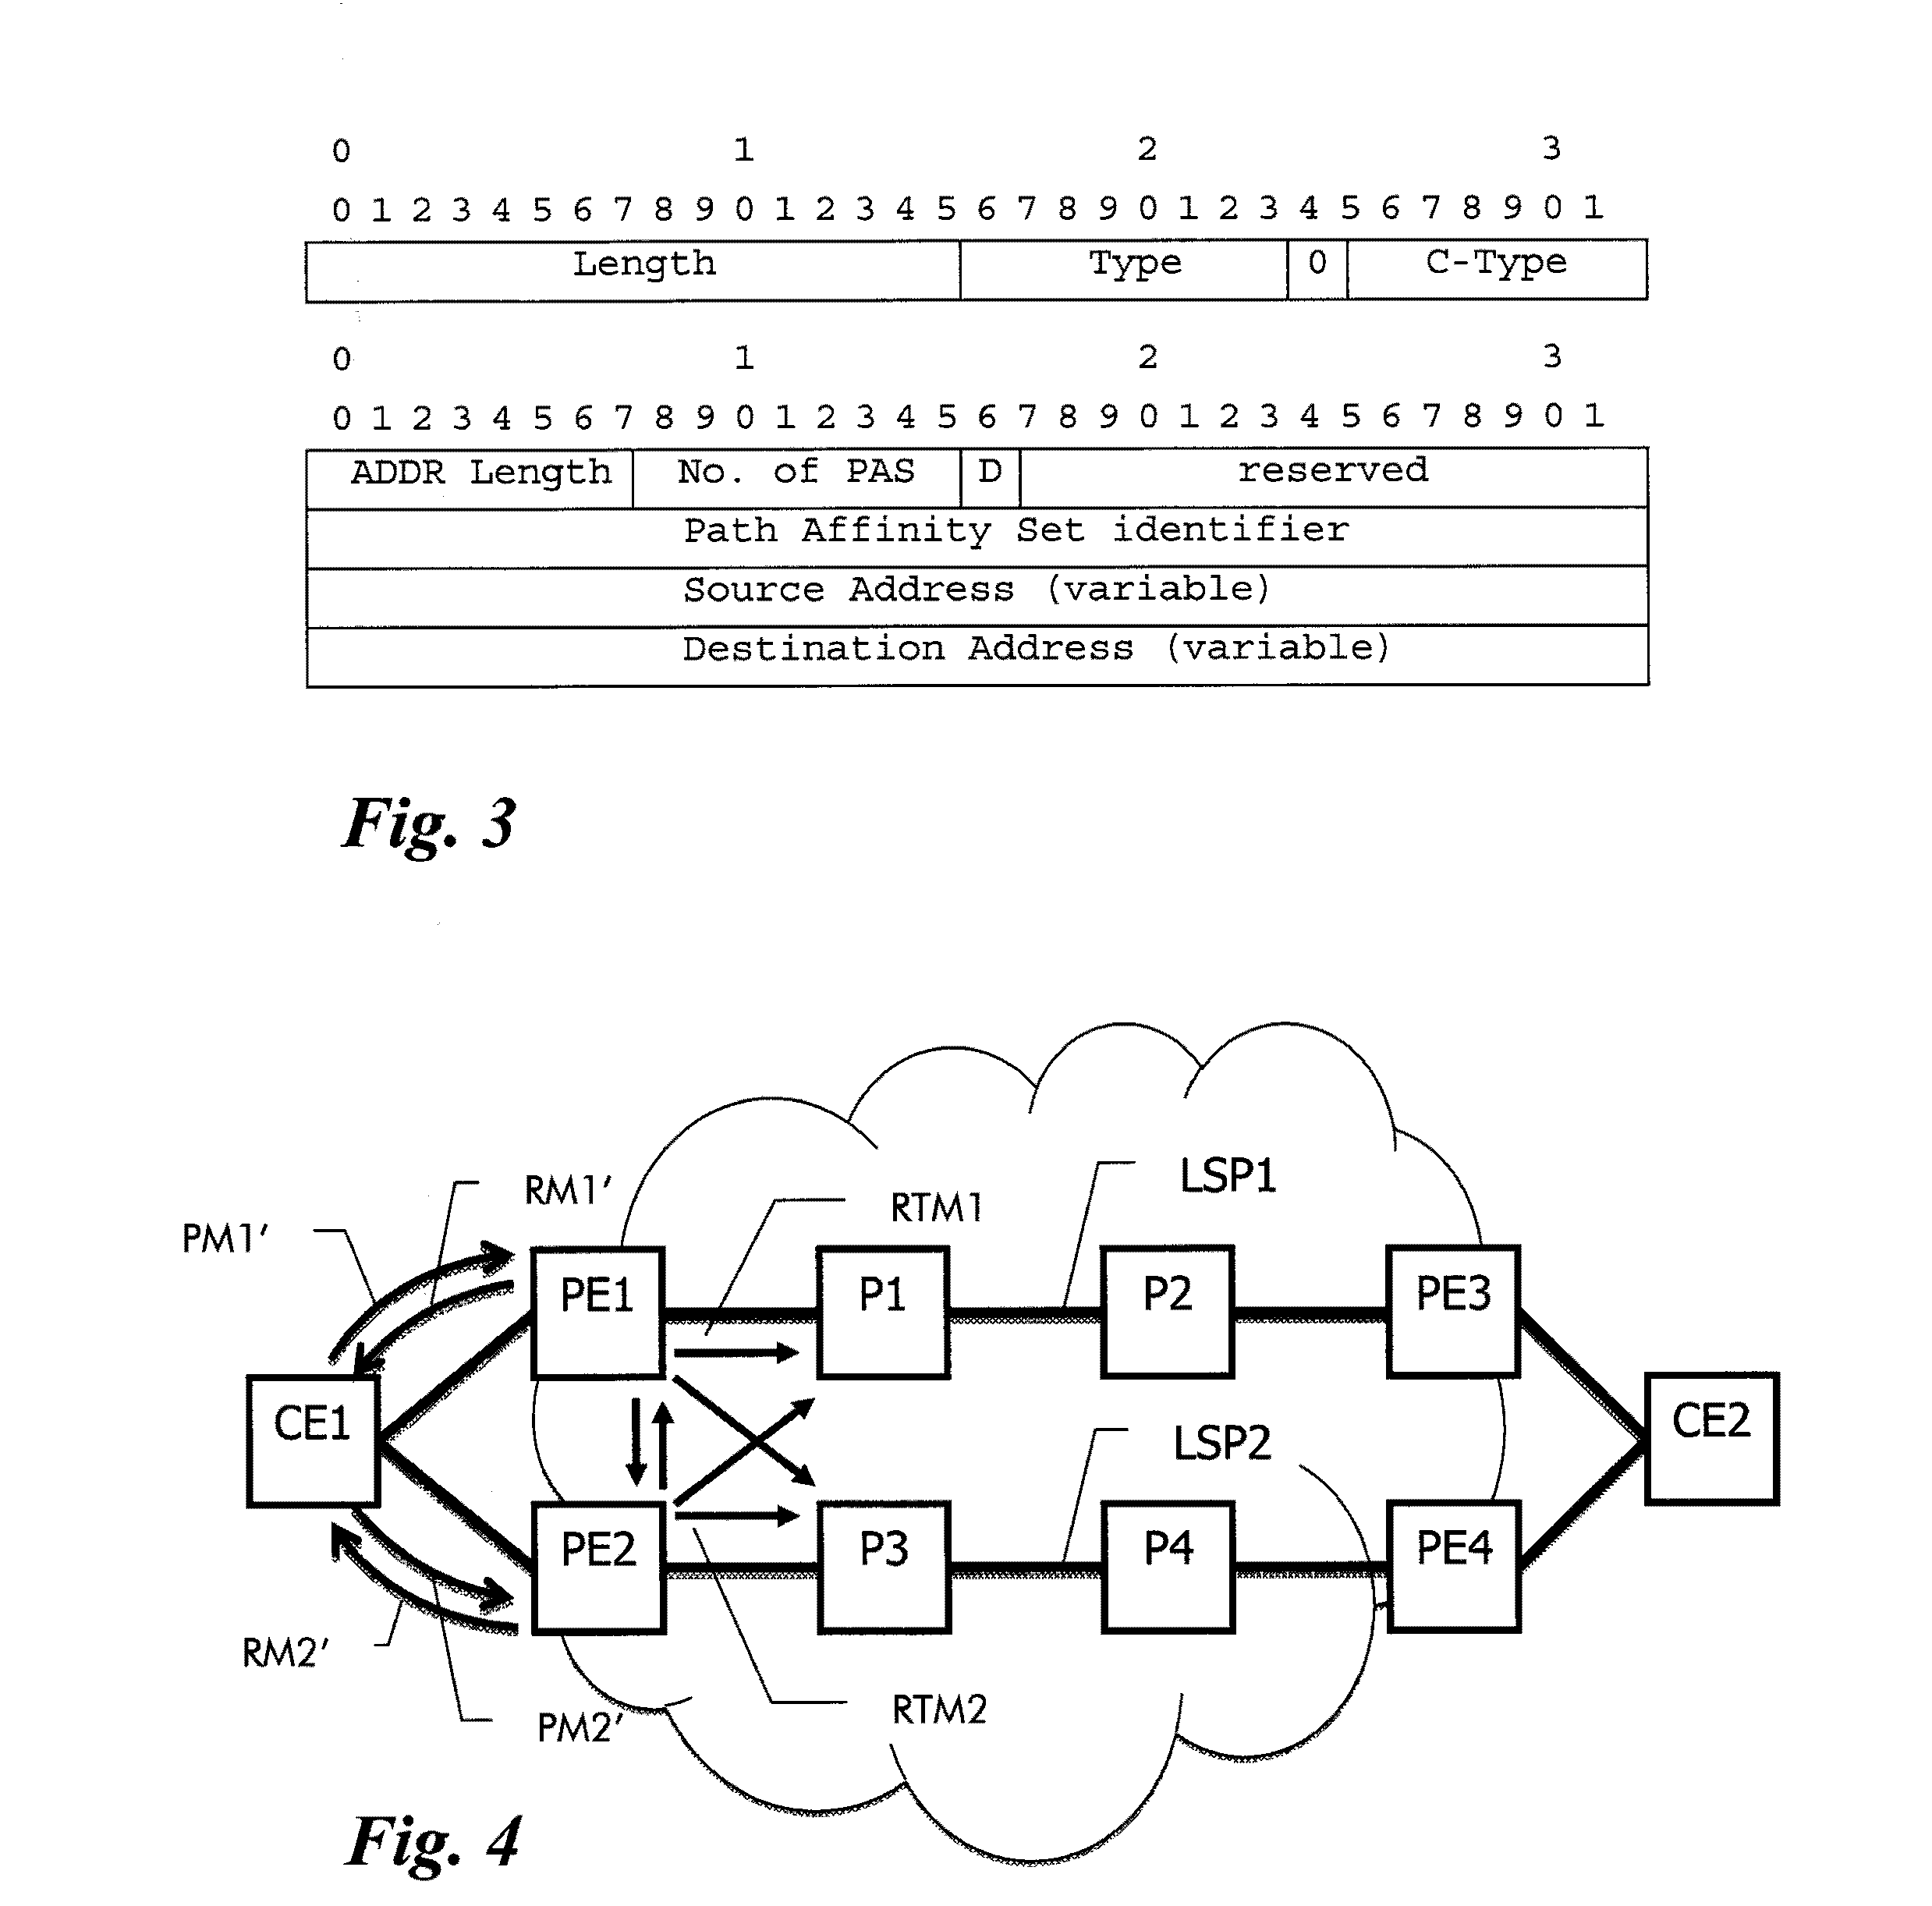 Method and related apparatus for establishing link-diverse traffic paths in a telecommunications network